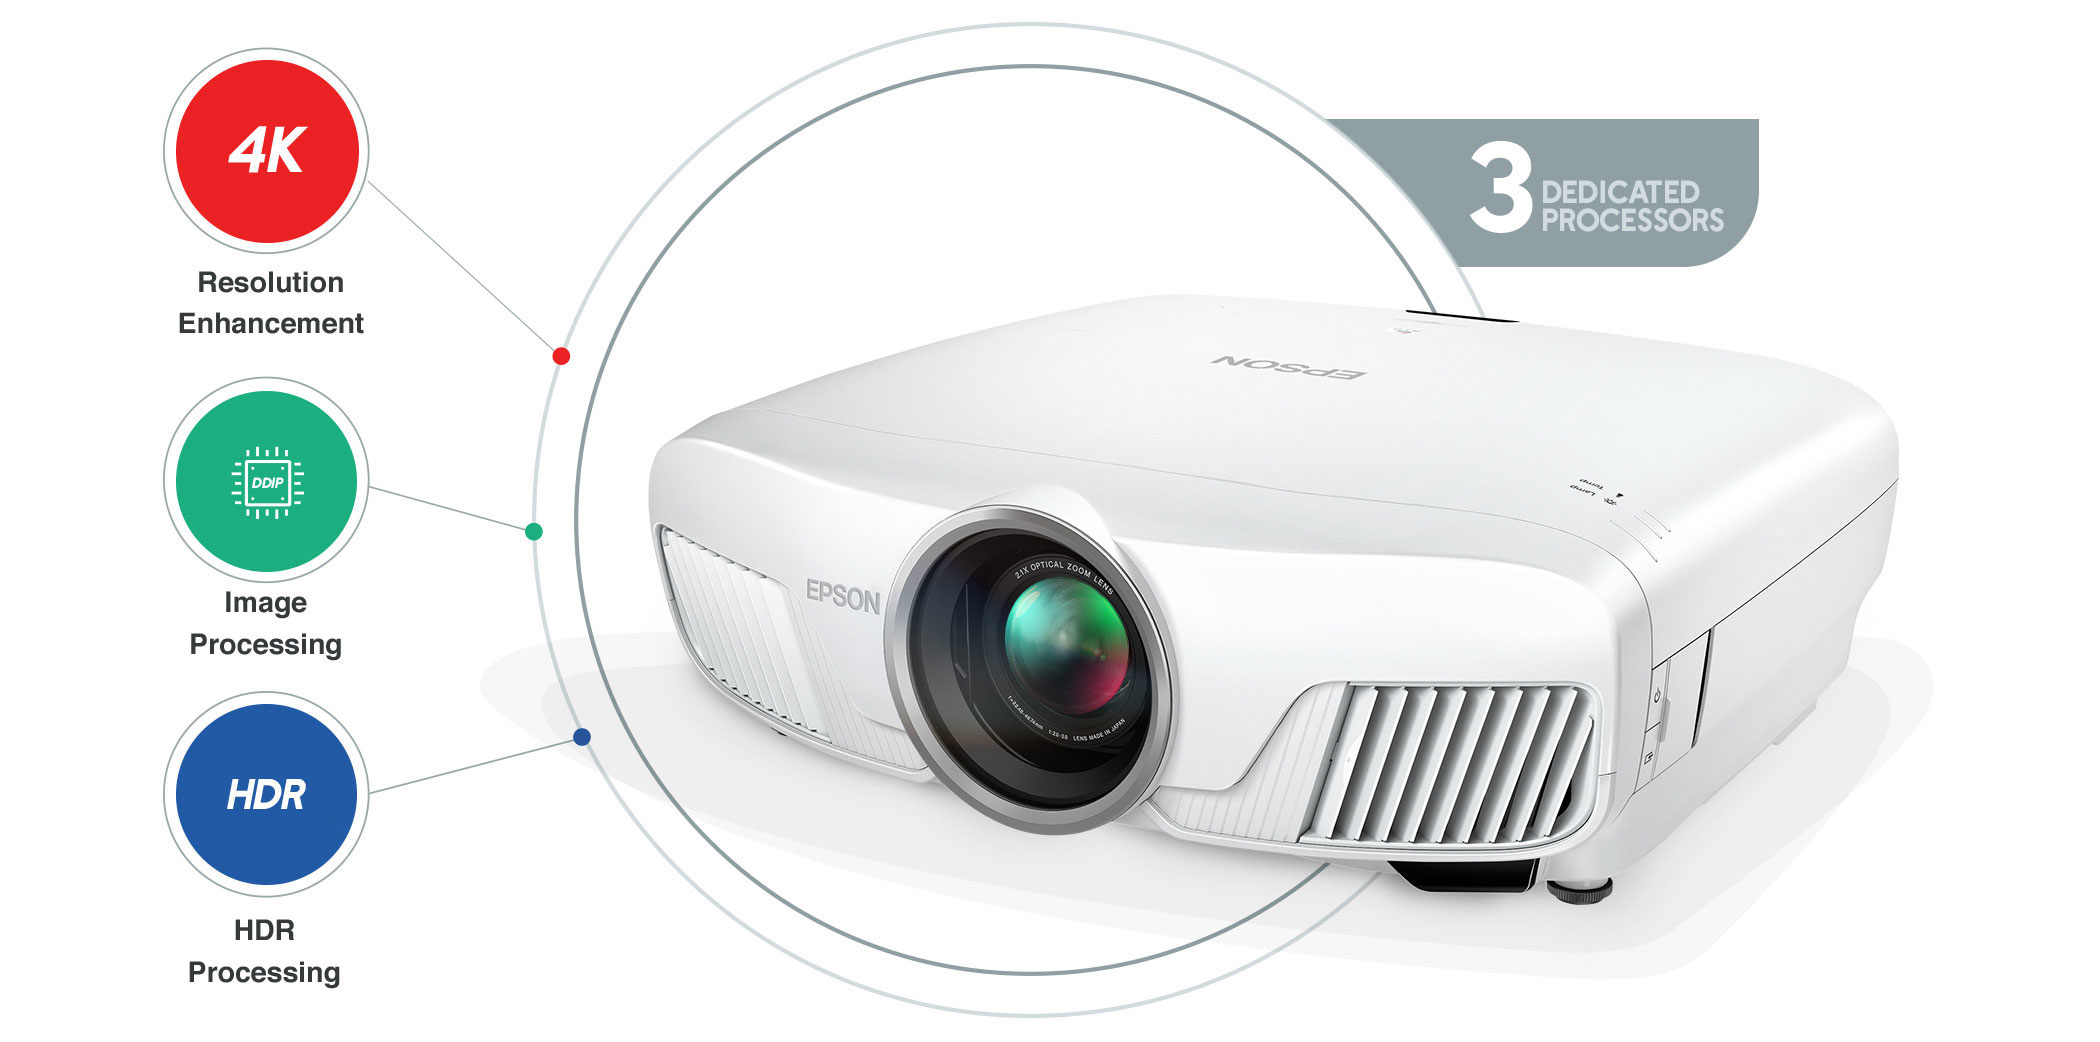 Epson Projector 3 dedicated processors for 4k resolution enhancement, image processing and HDR processing